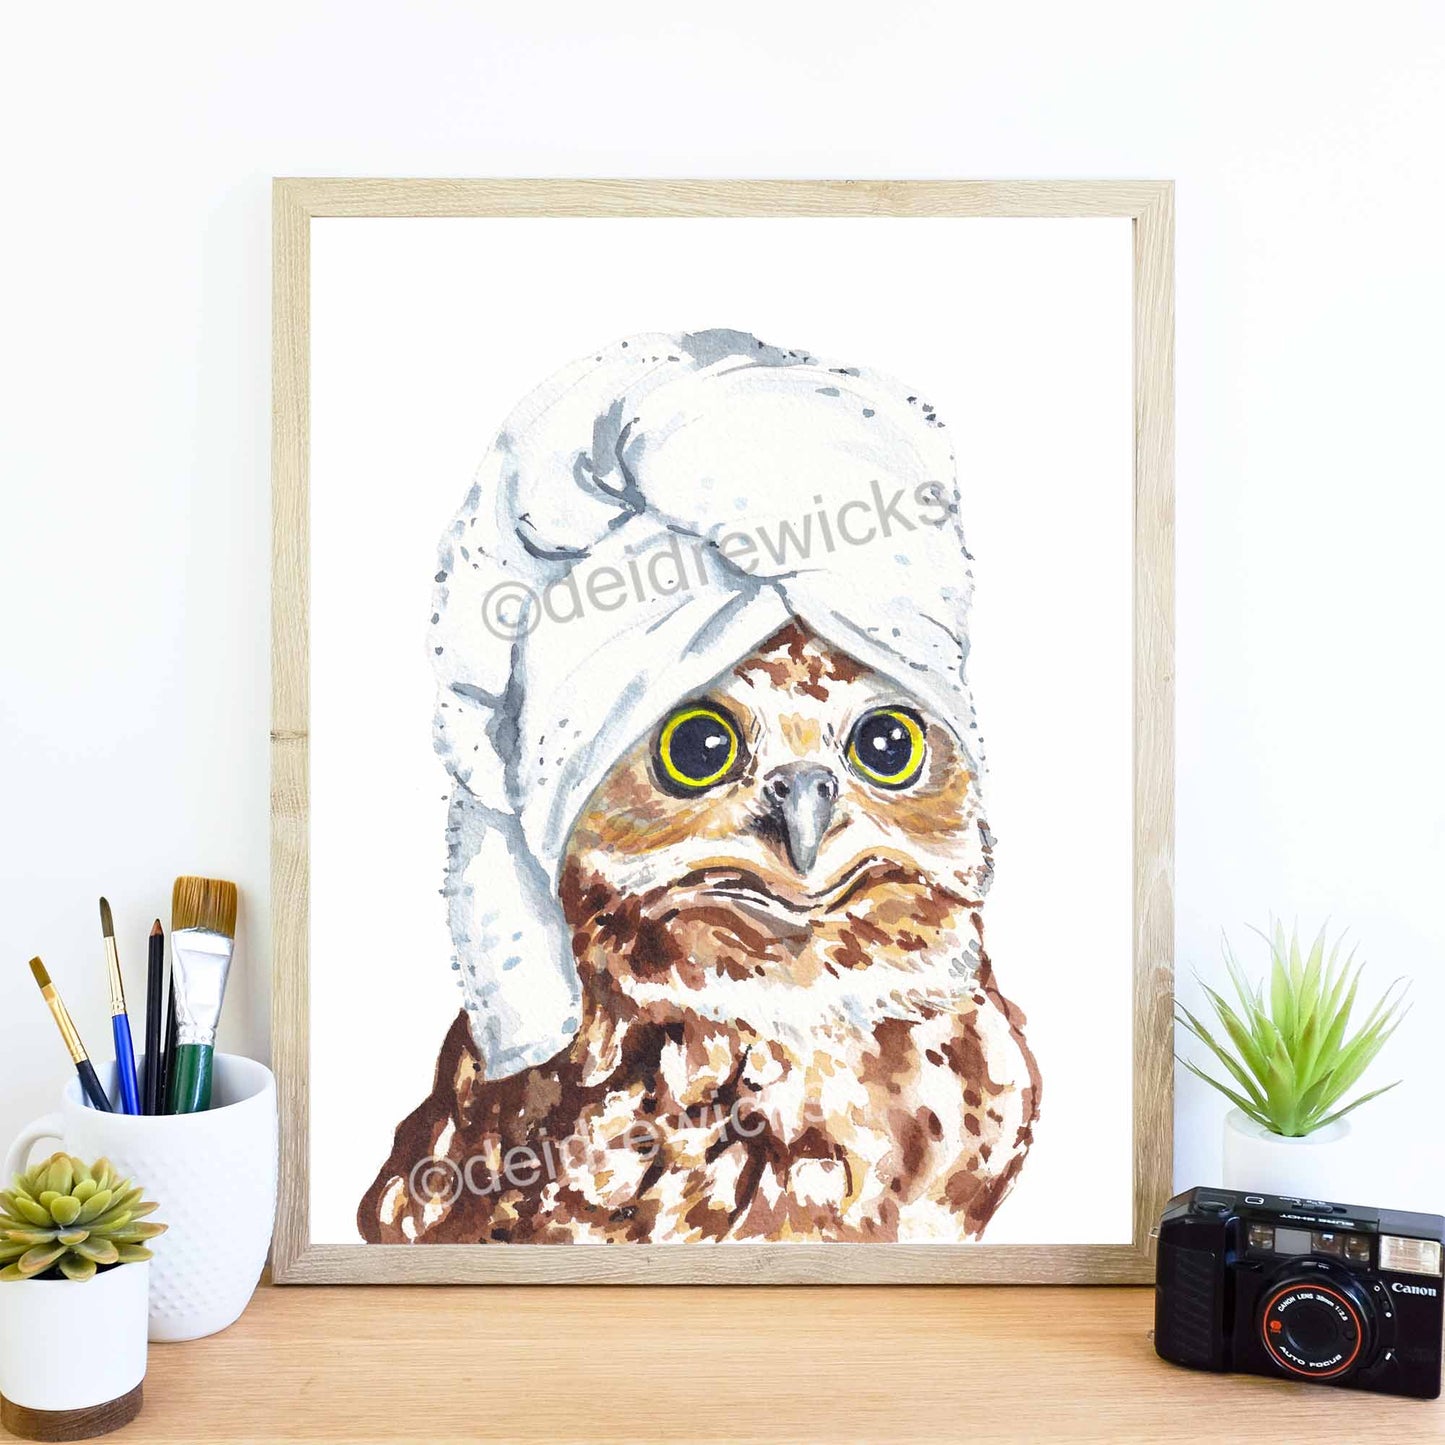 Framed example of a funny owl watercolour print by Water In My Paint